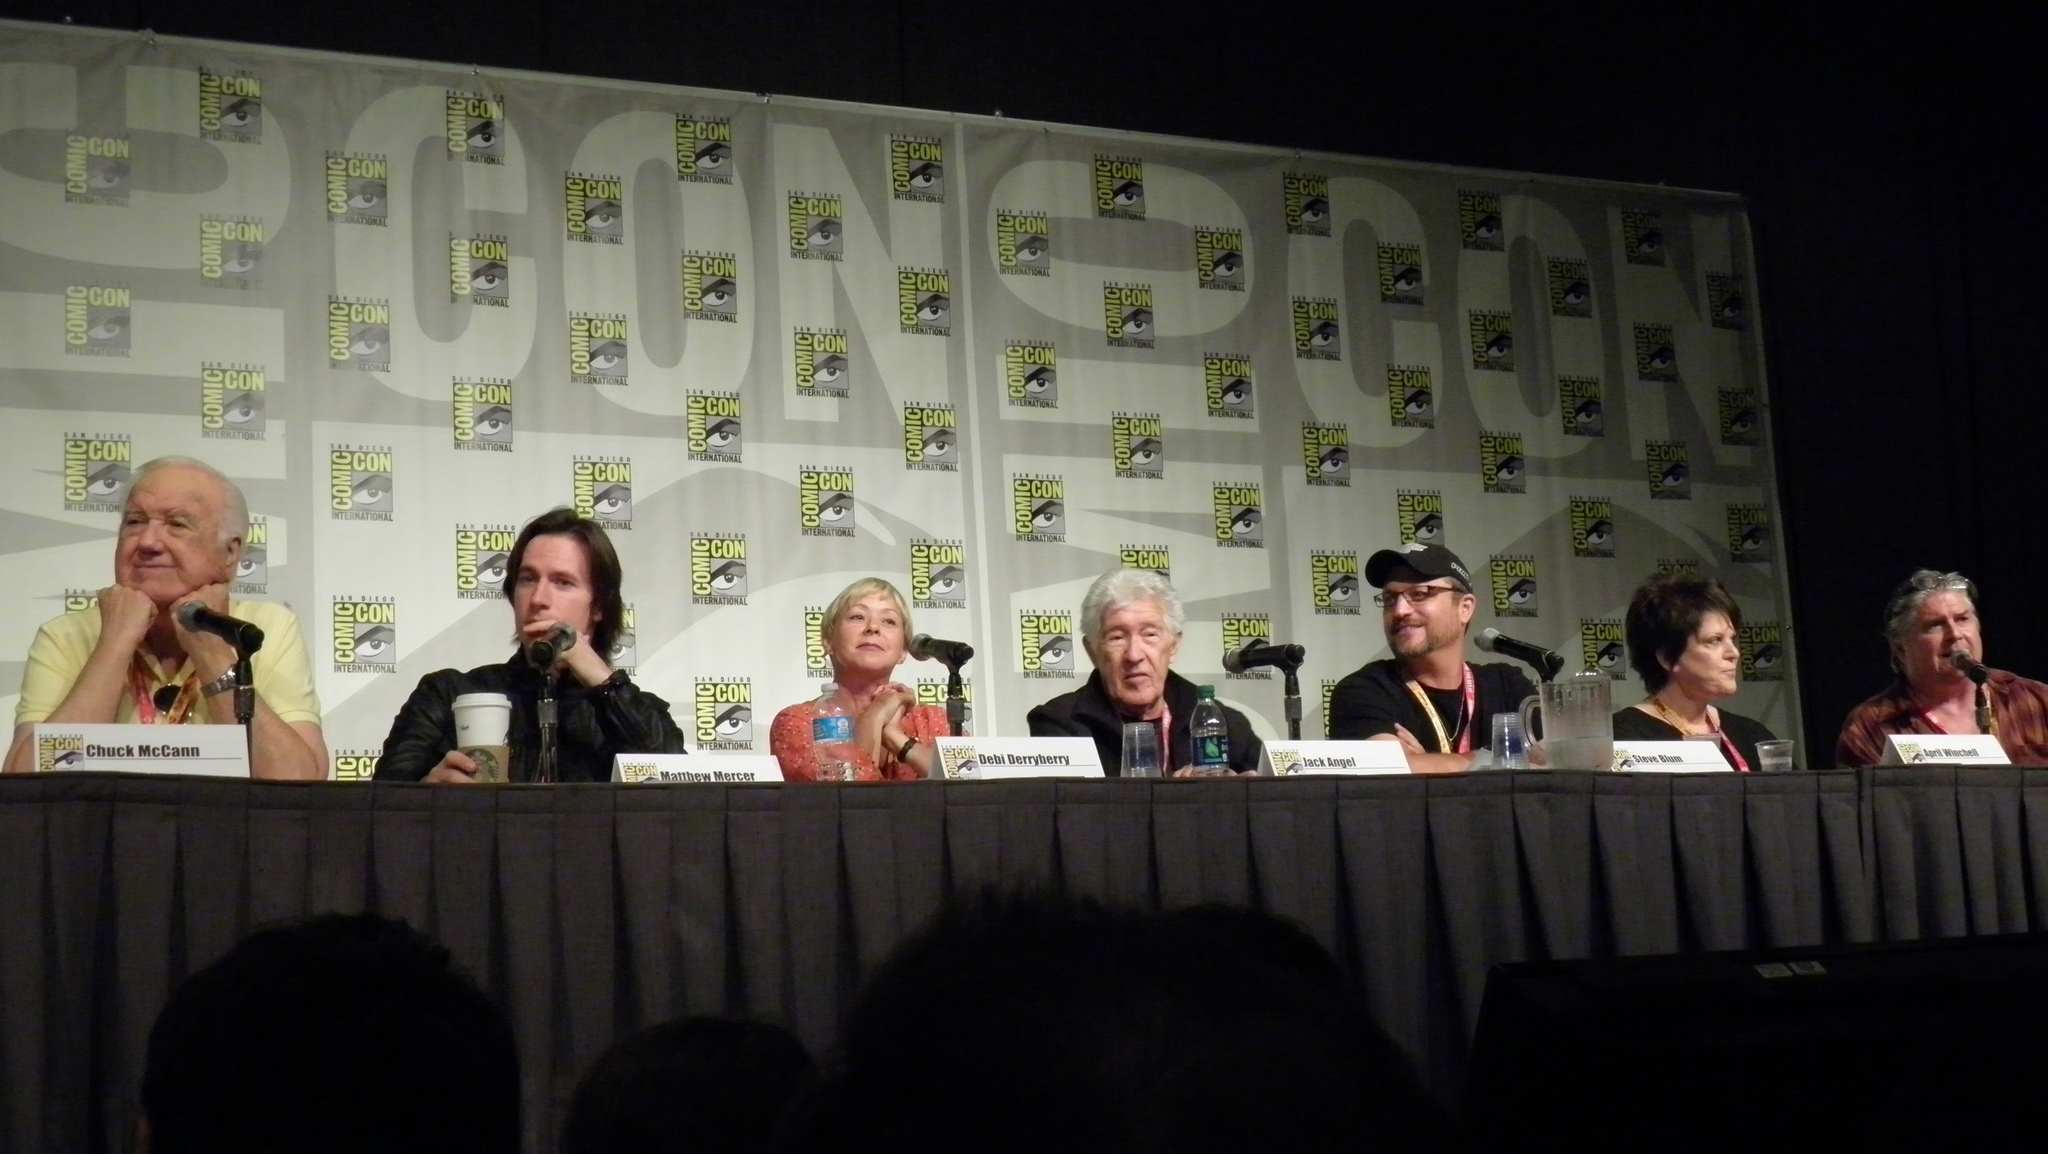 Matthew Mercer on the Voices in Animation panel. San Diego Comic-con 2012